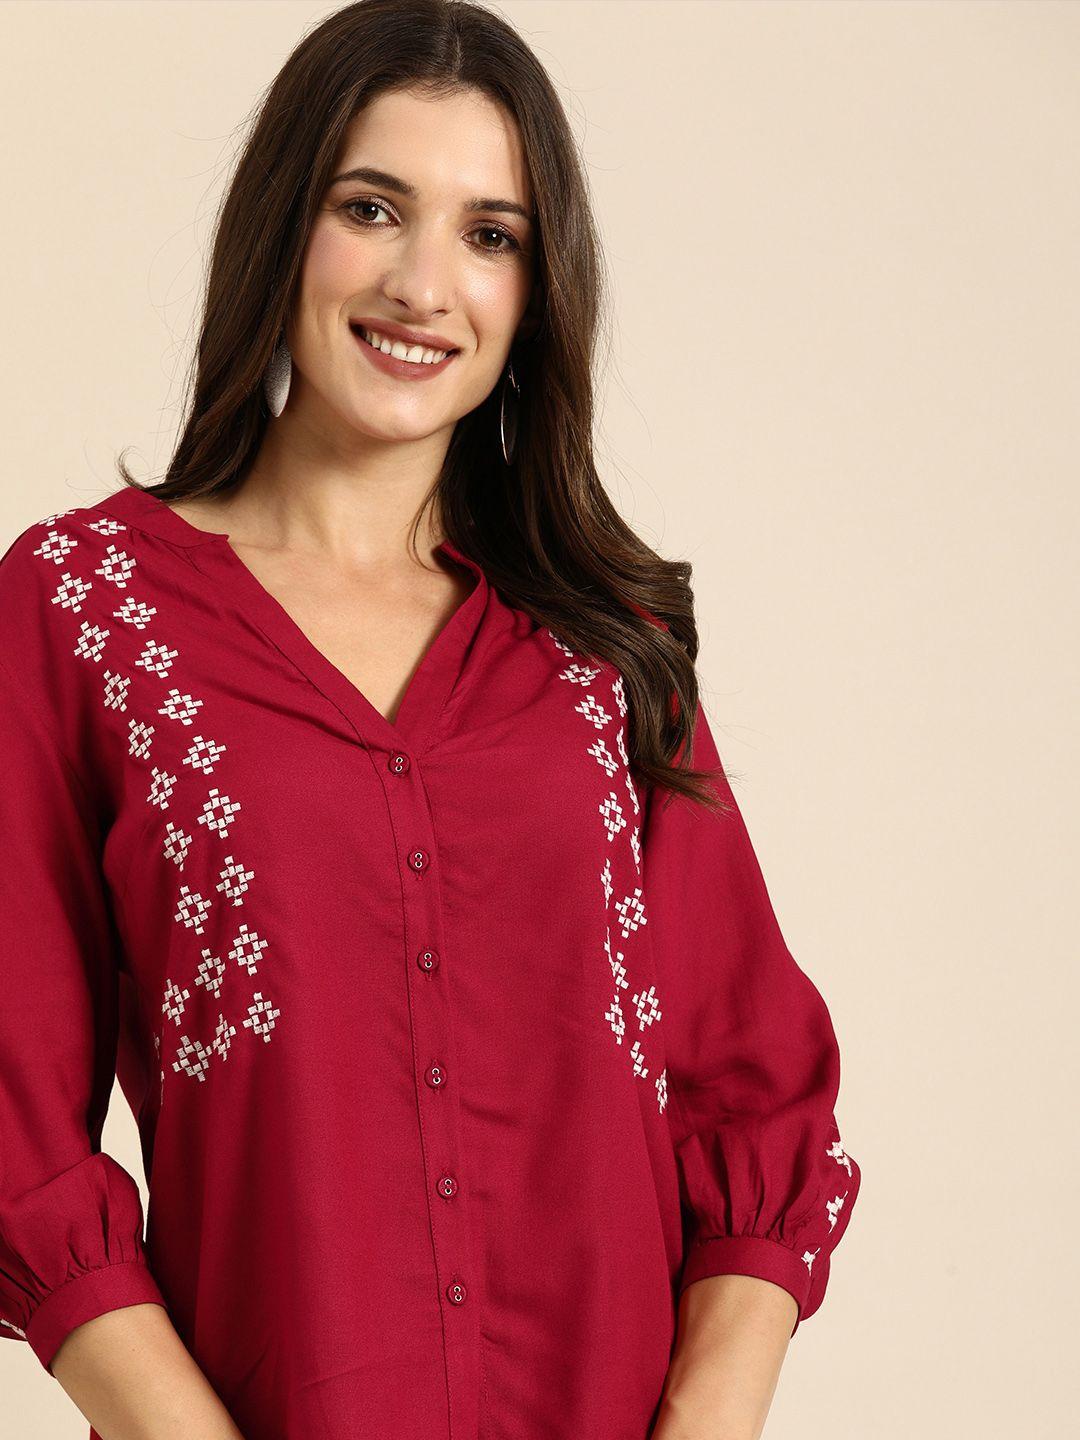 all about you red embroidered shirt style top